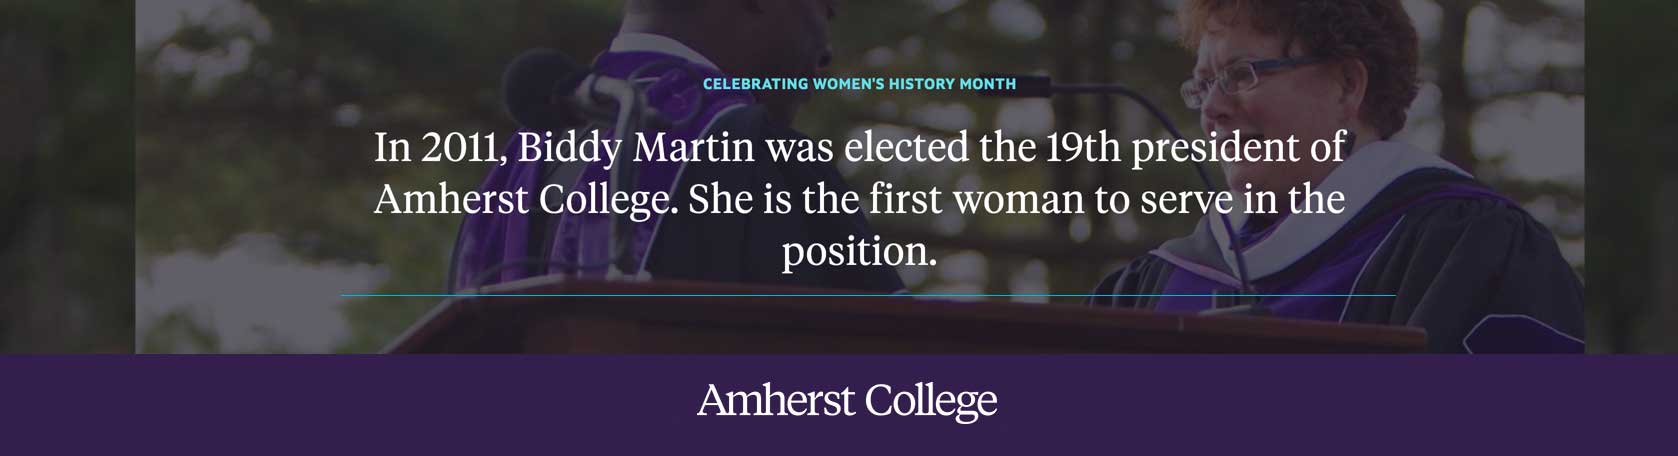 In 2011, Biddy Martin was elected as the 19th president of Amherst College and the first woman to serve as president